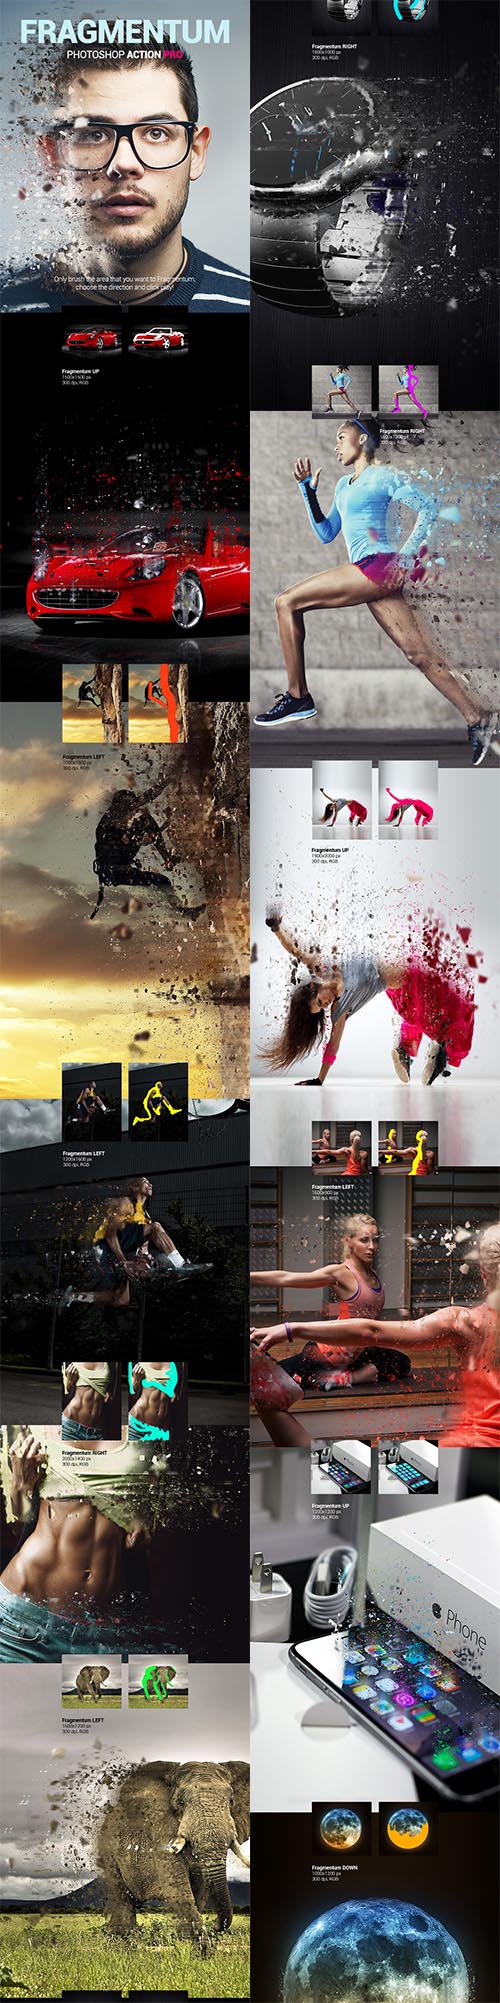 GraphicRiver - Fragmentum PS Action 10775357